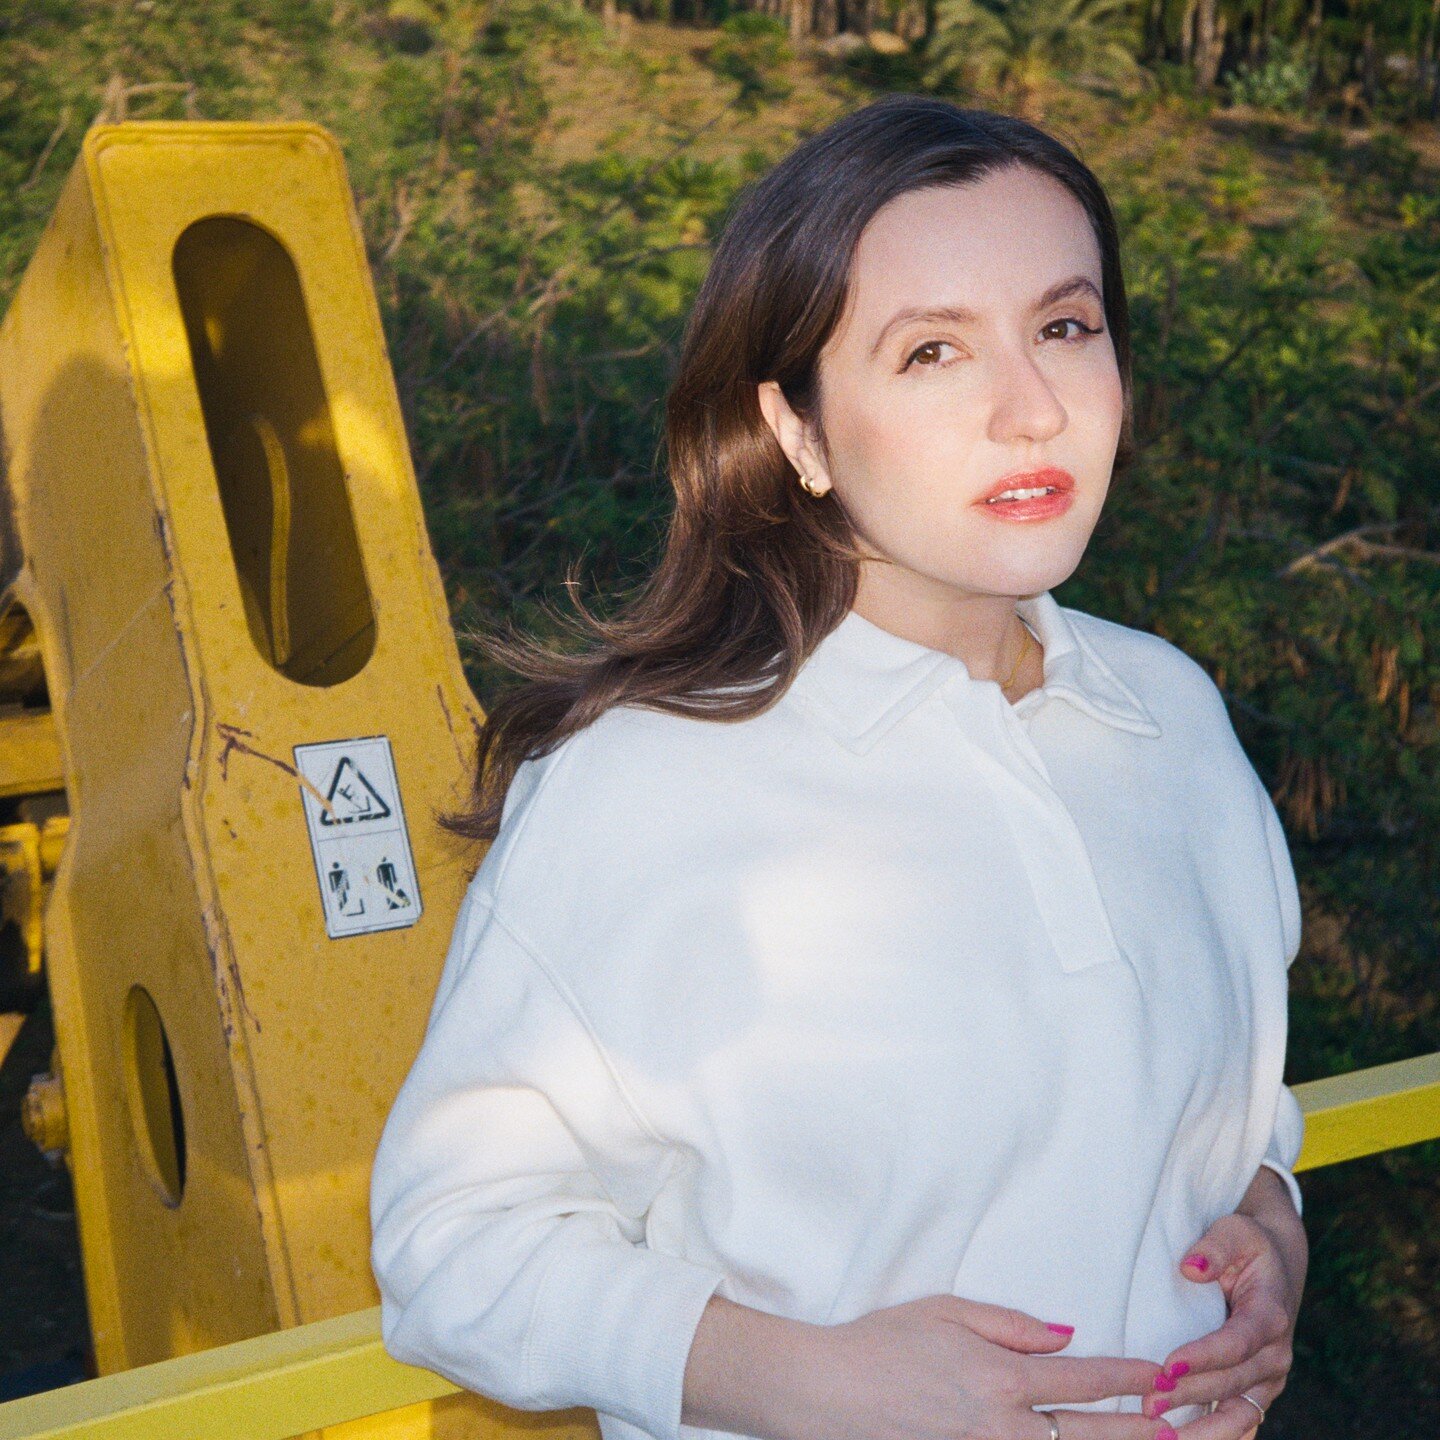 @jessy.lanza announces her new album, Love Hallucination, out via Hyperdub on July 28 heralded by new single &ldquo;Midnight Ontario,&rdquo; featuring a music video directed by Infinite Vibes. With her most recent release, &ldquo;Don't Leave Me Now,&